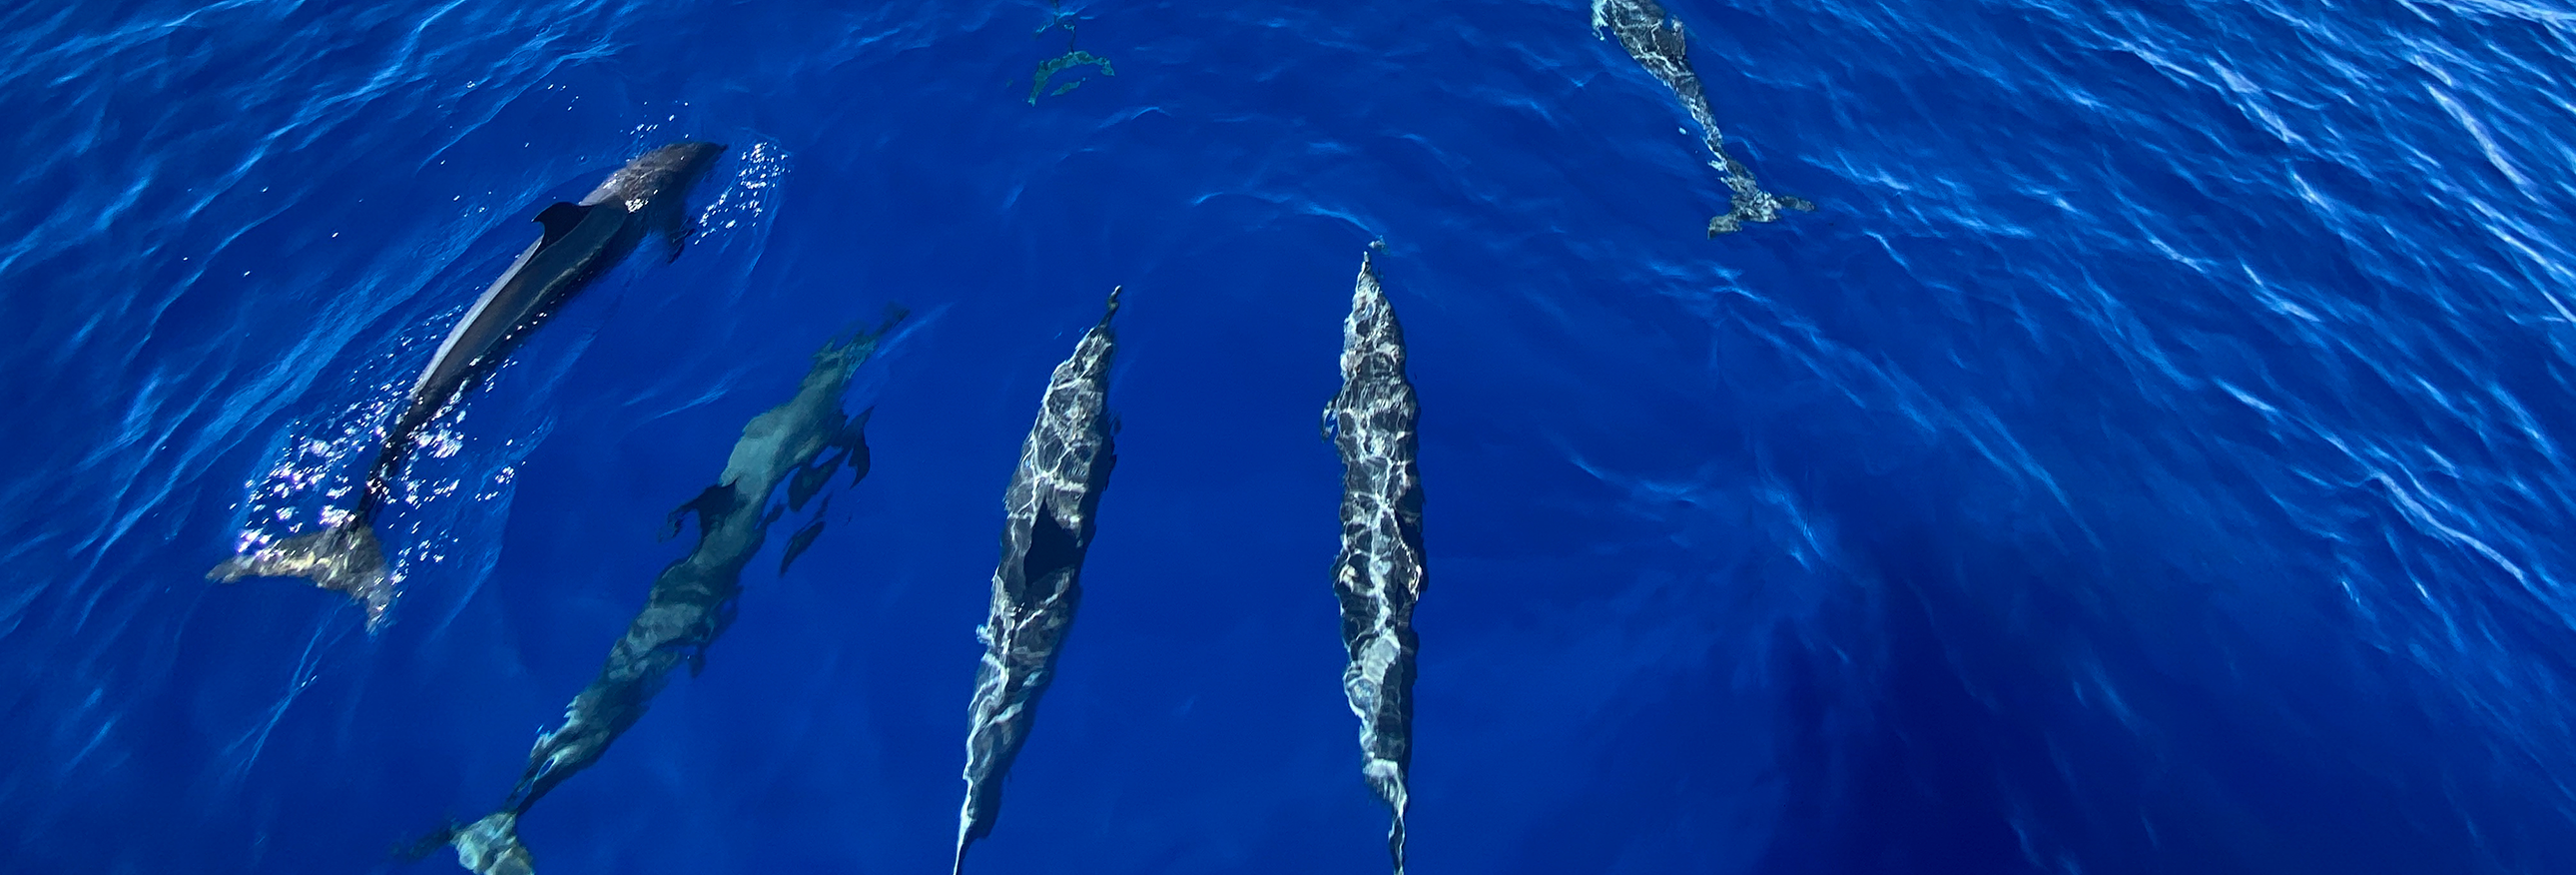 A squad of dolphins and bright blue water.